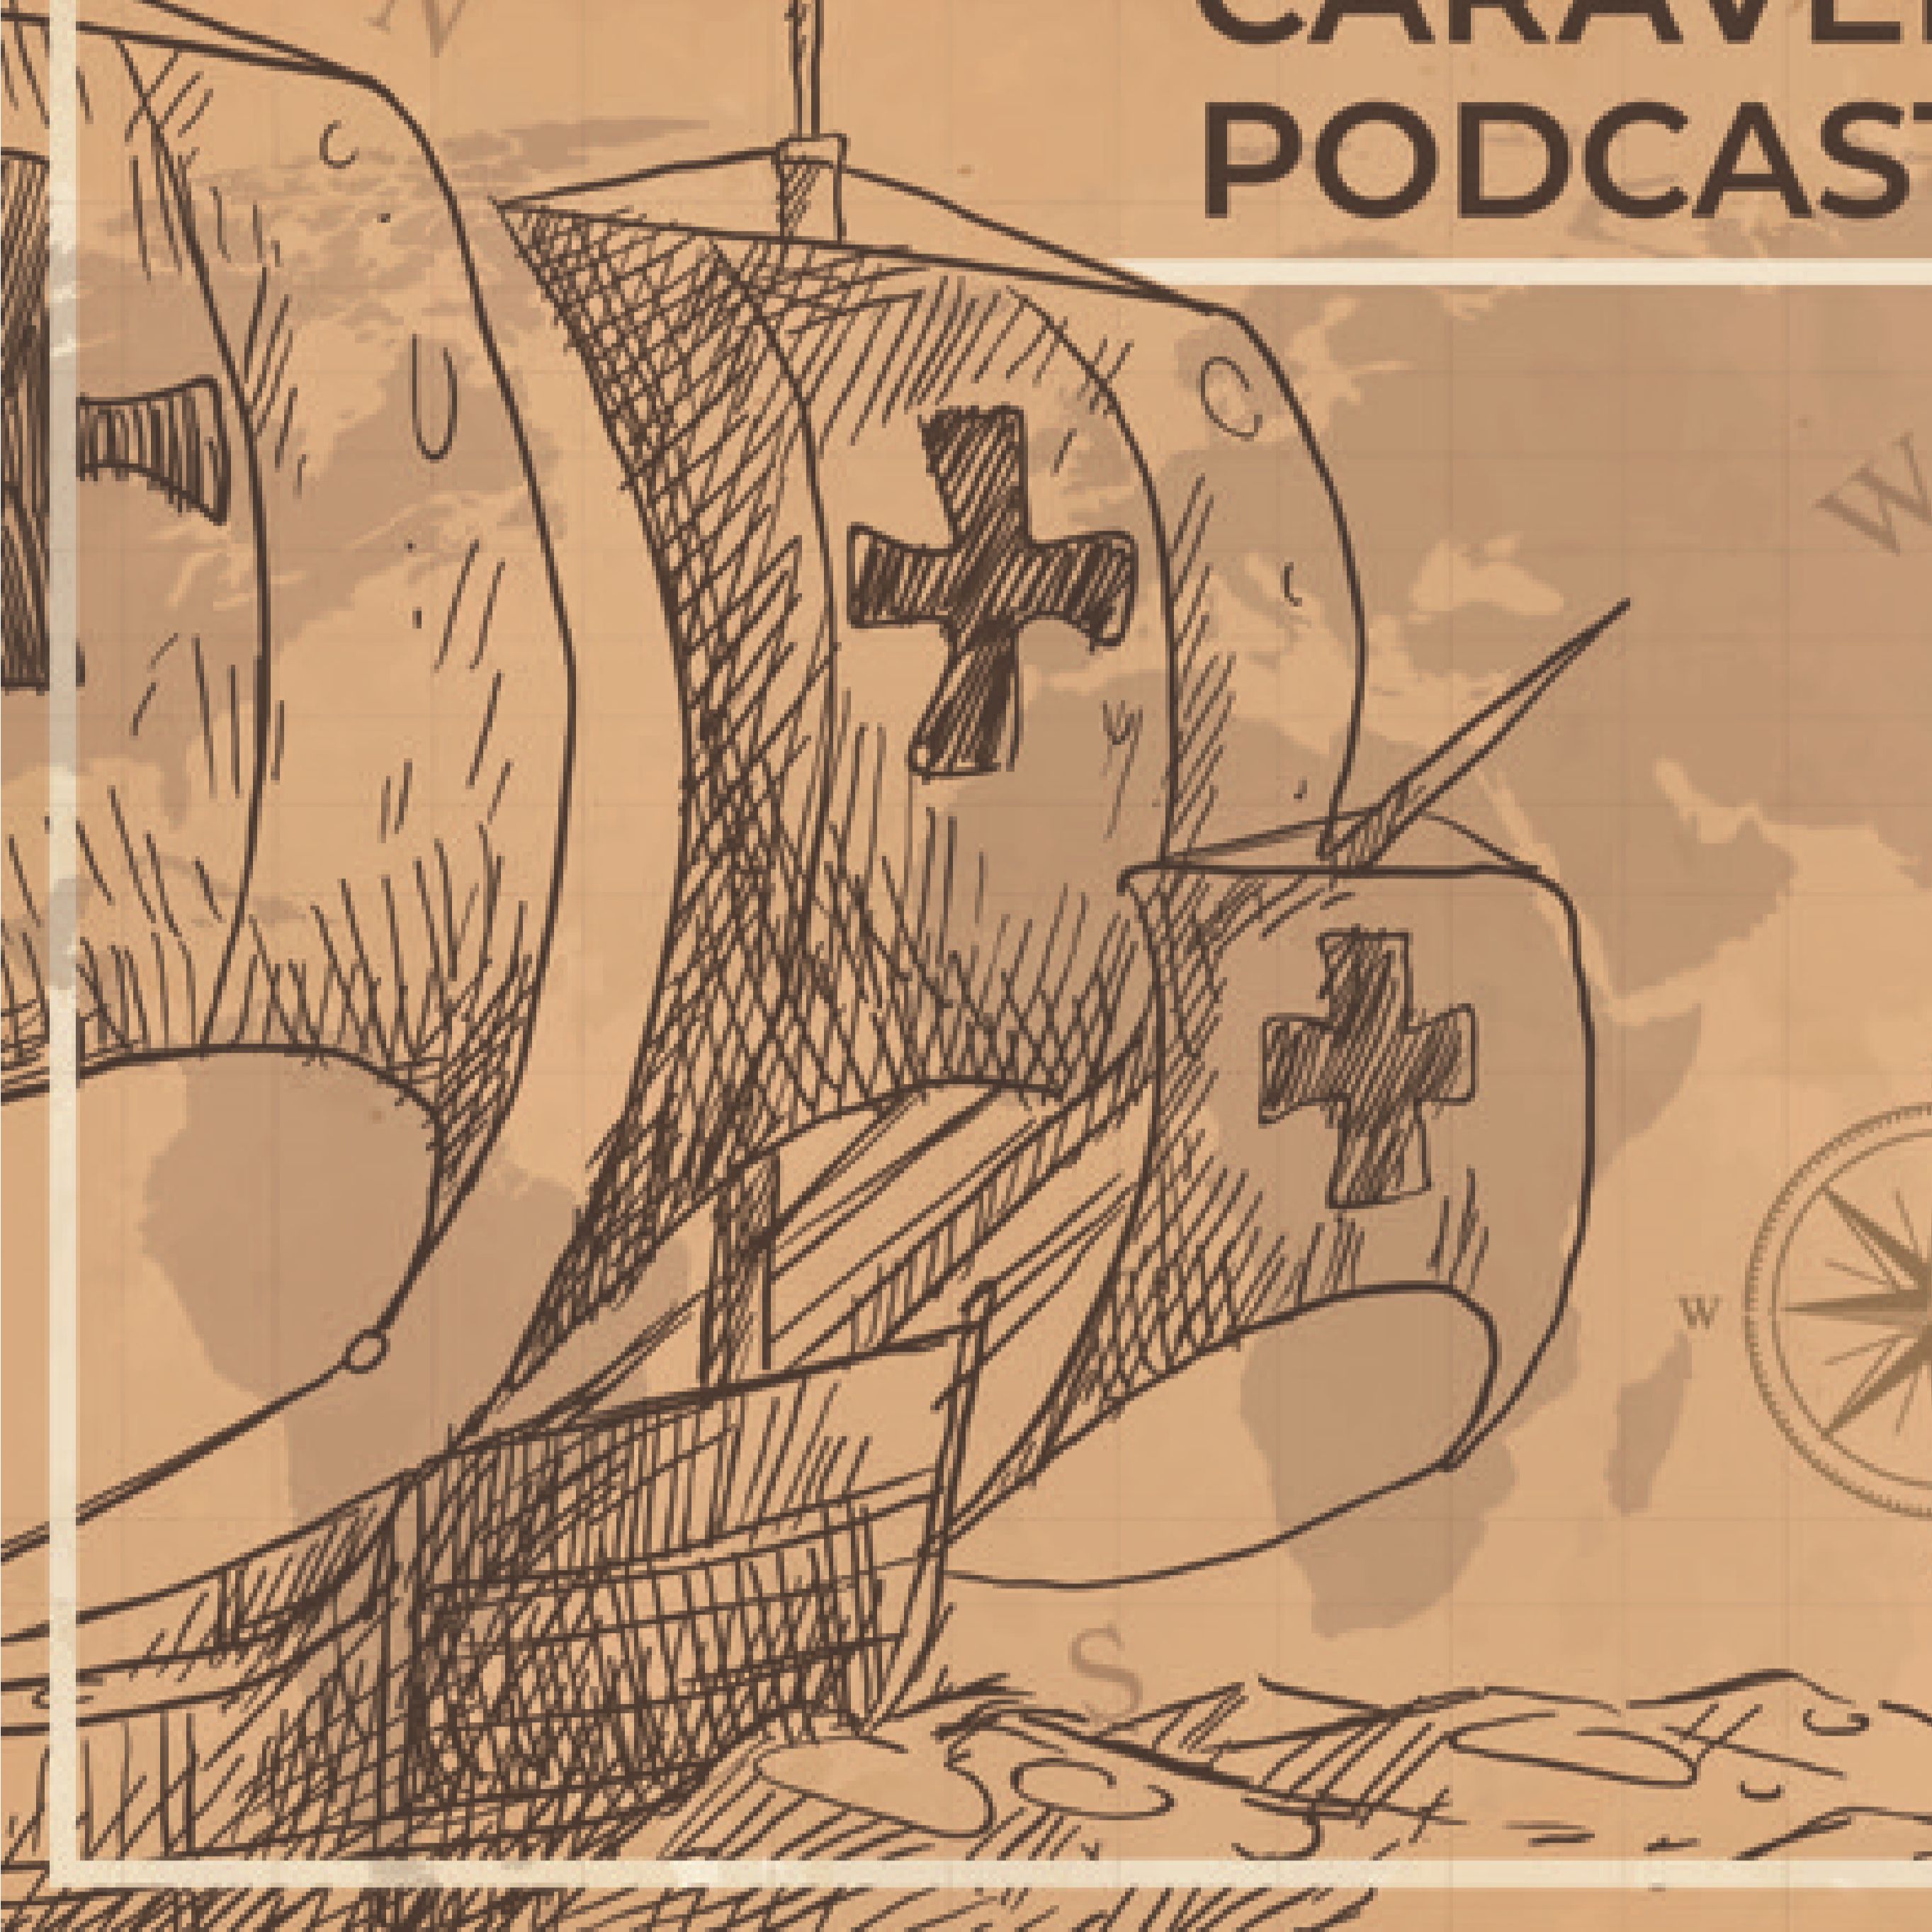 The Caravel Podcast